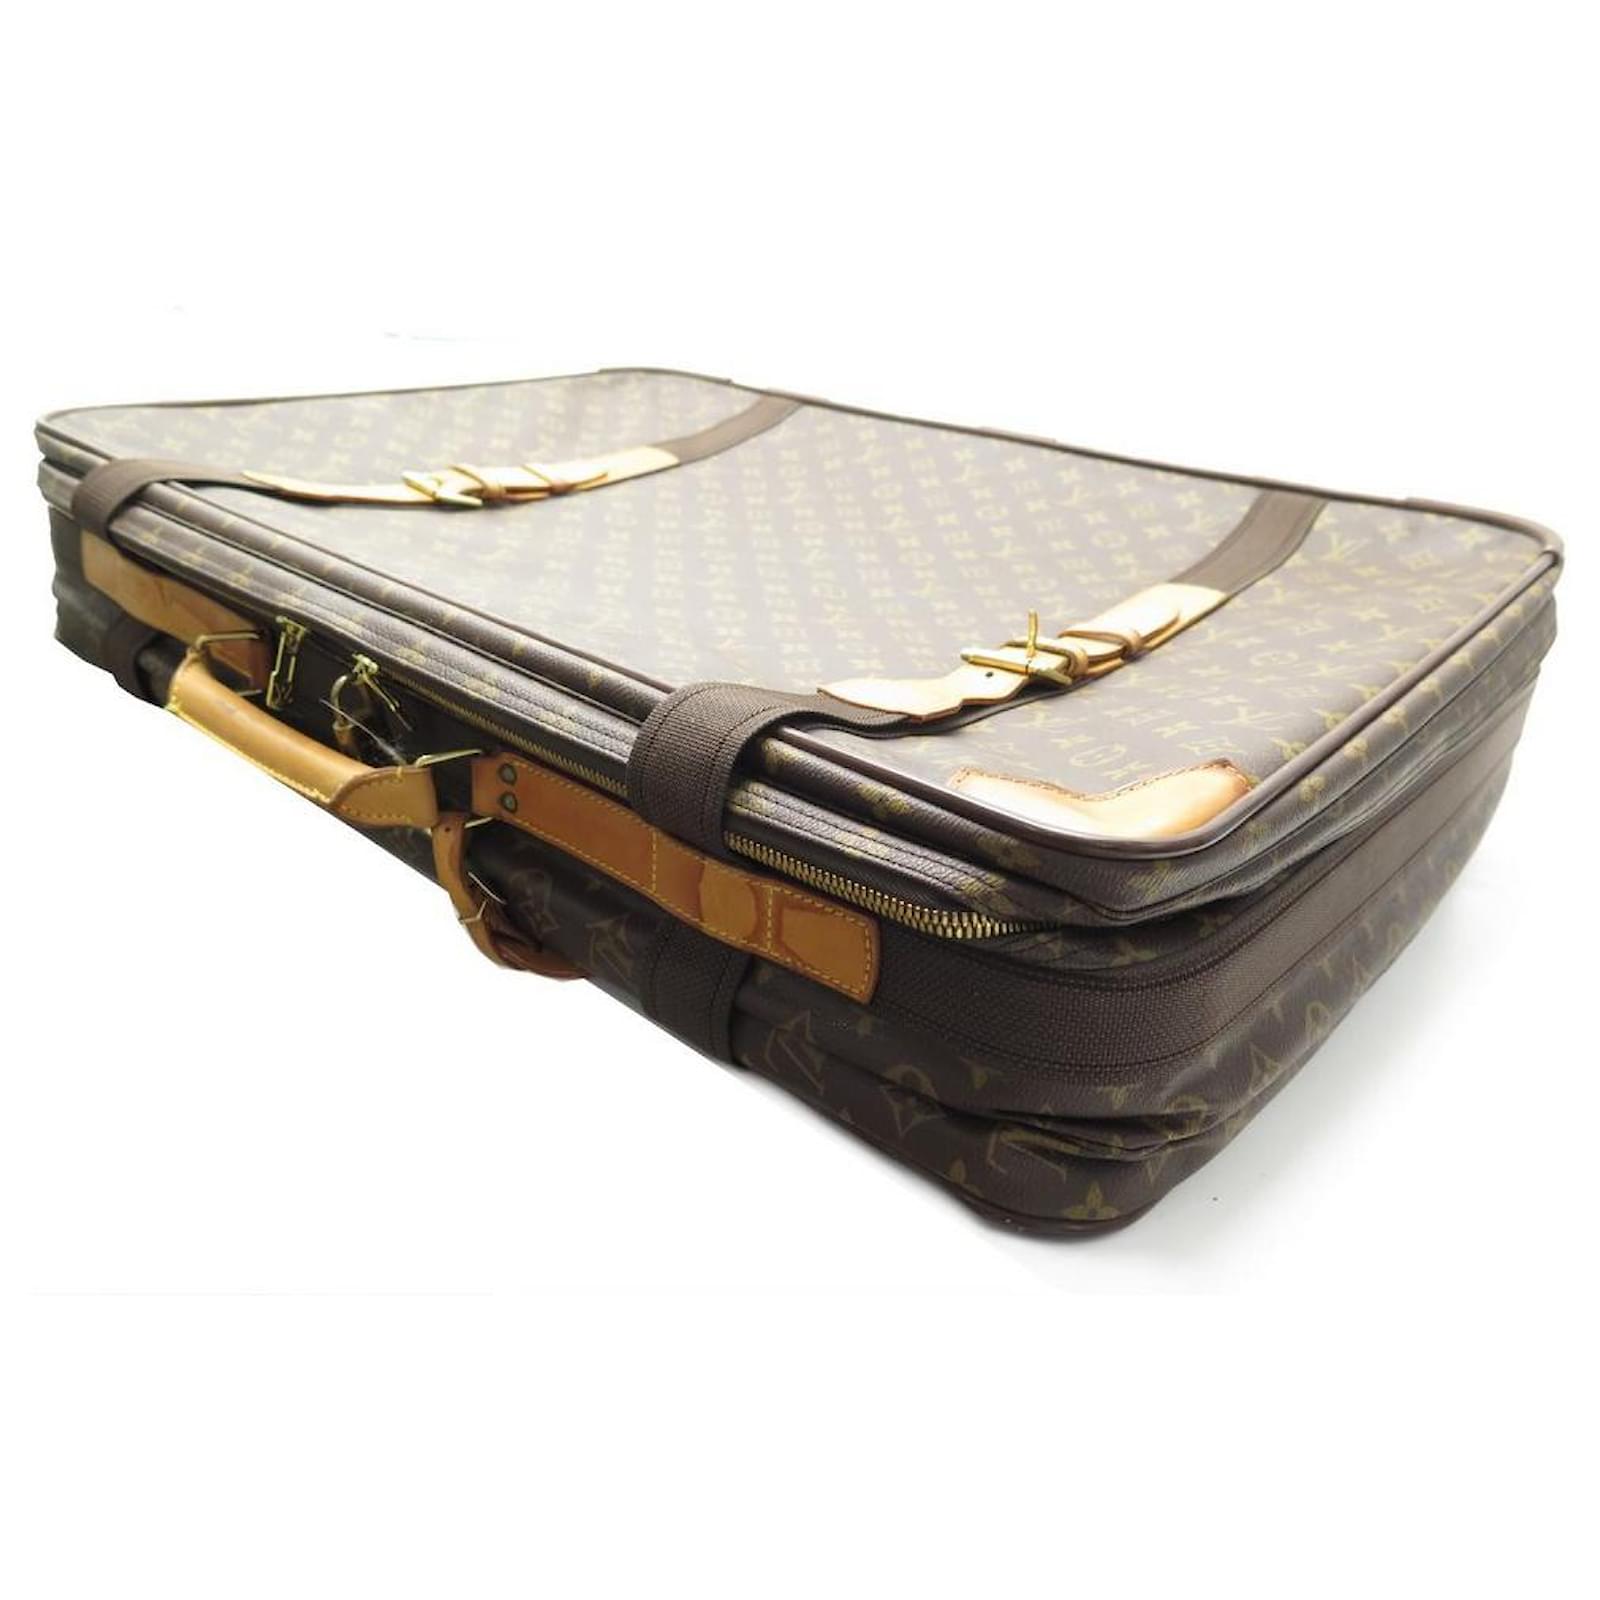 Sold at Auction: Louis Vuitton suitcase Satellite 70 in